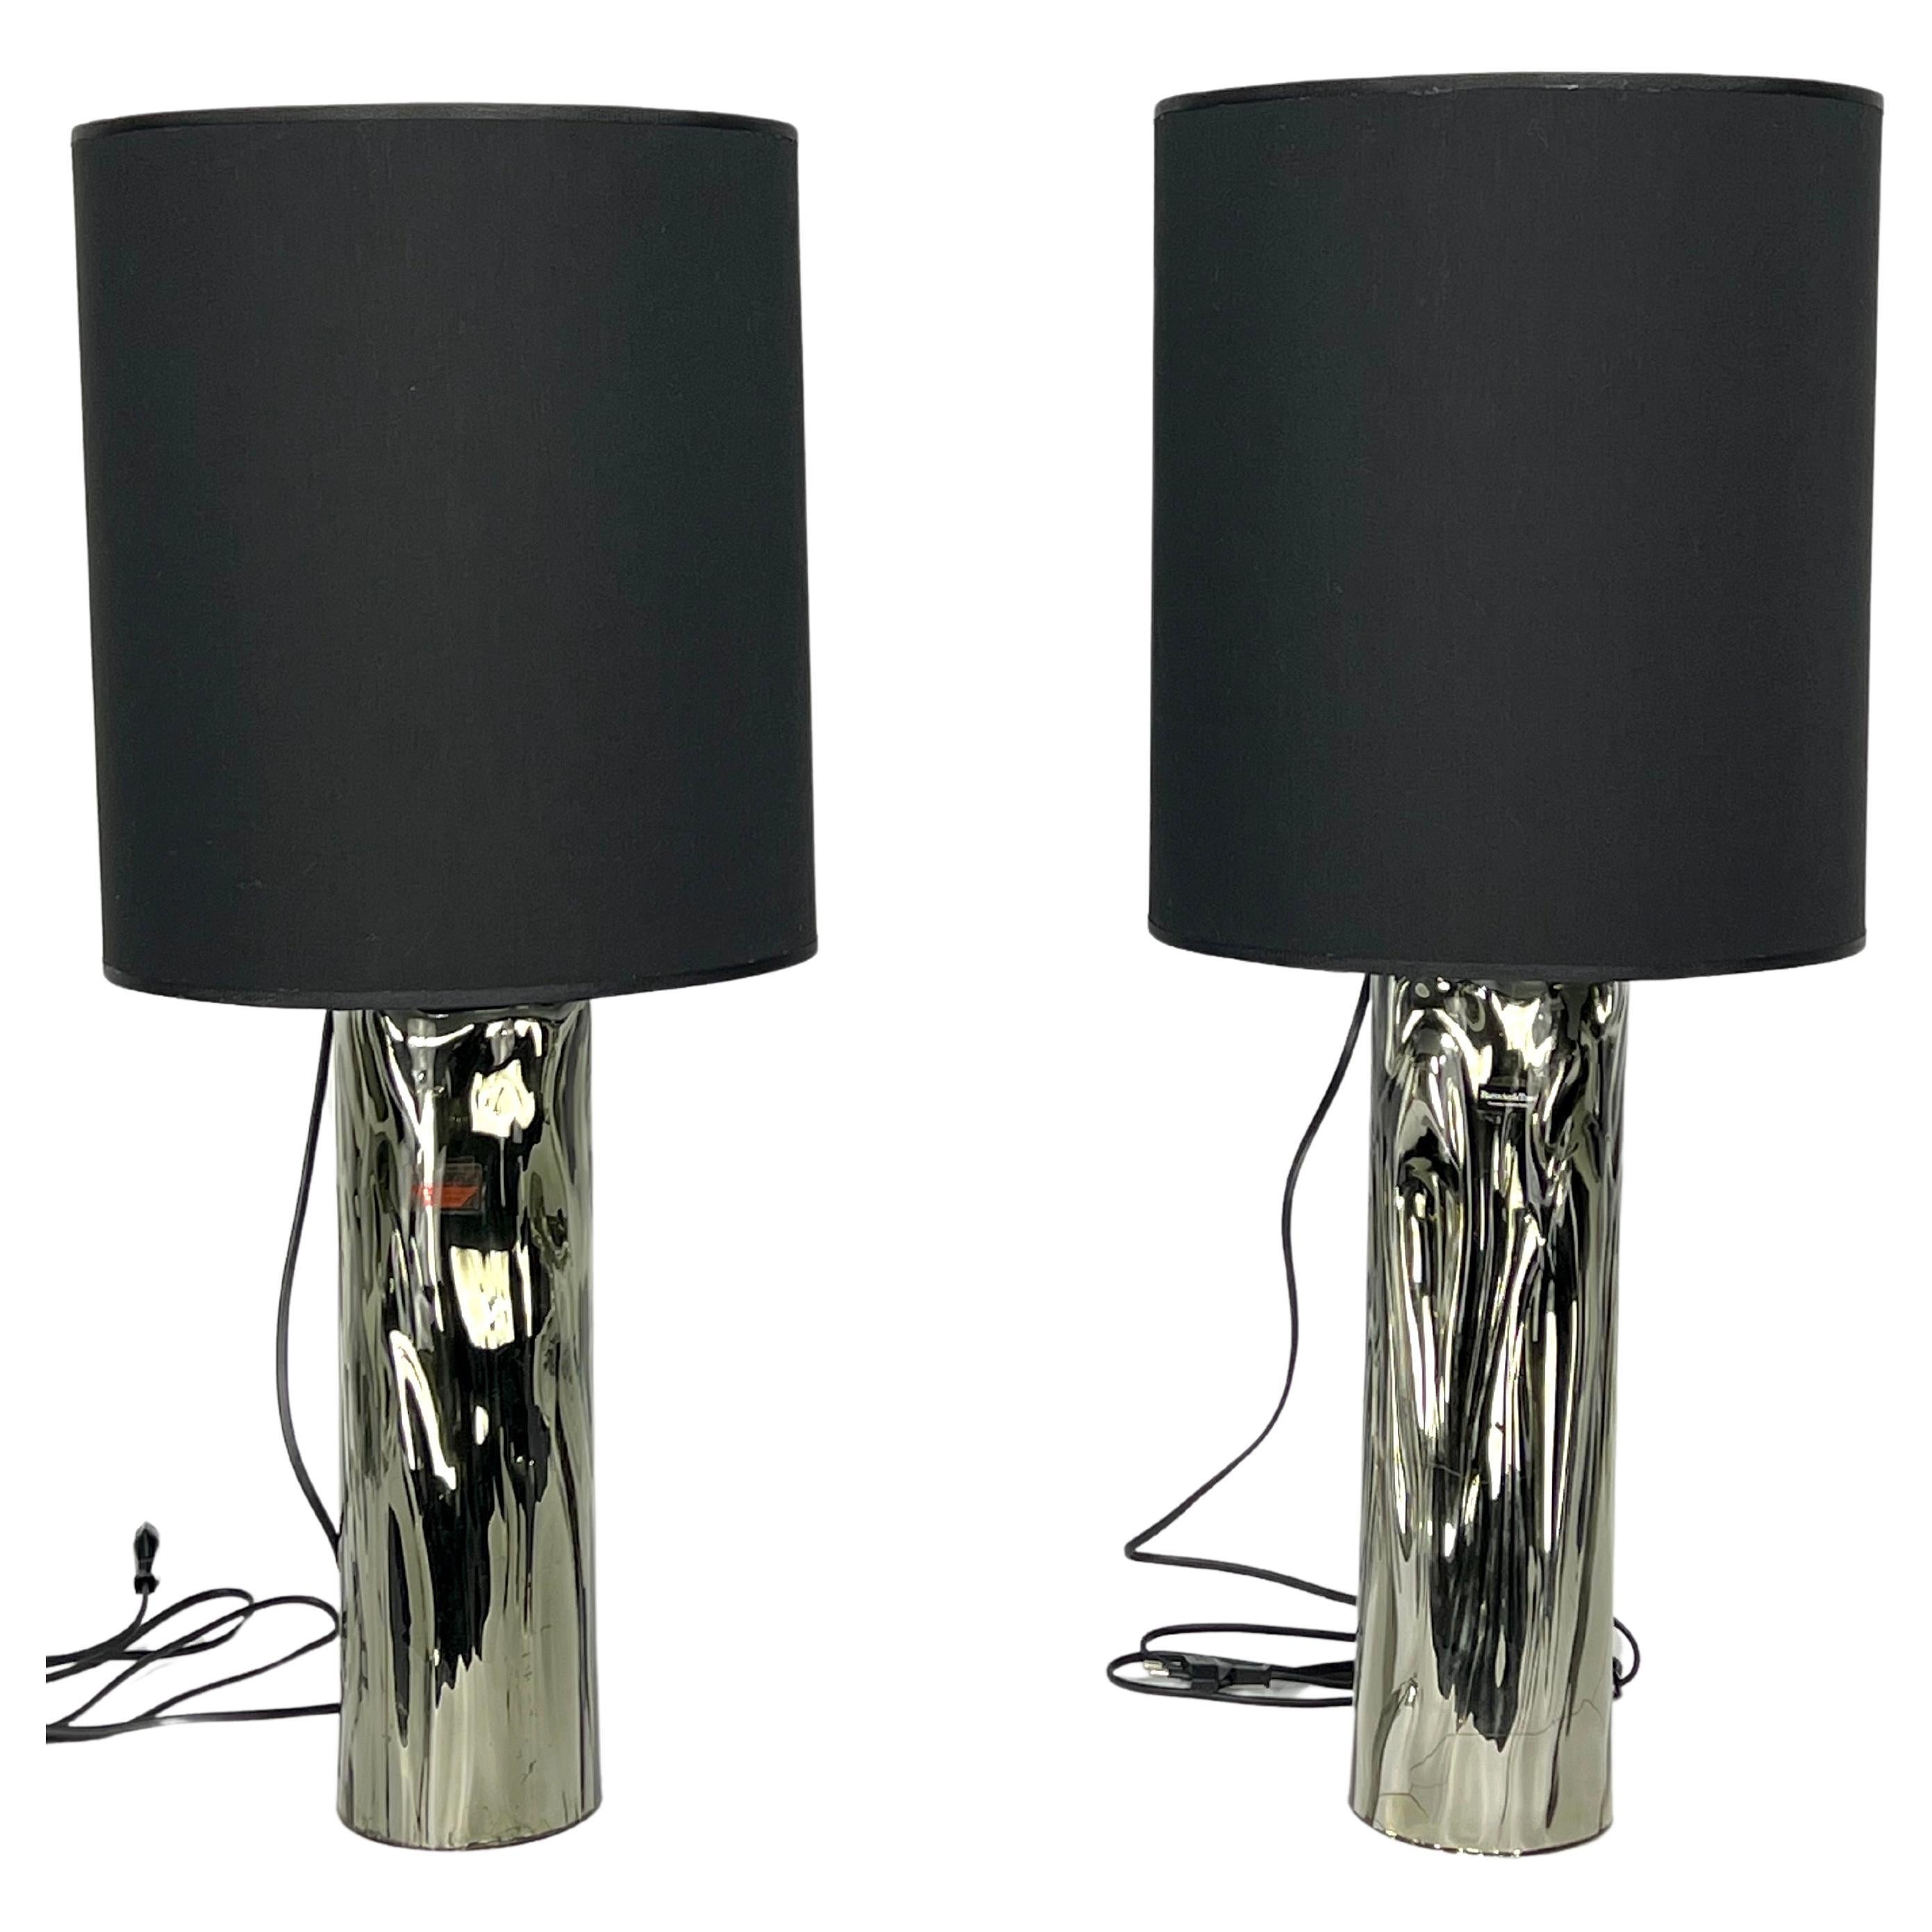 Barovier & Toso, Pair of Murano Glass Table Lamps from 70s. Labeled For Sale